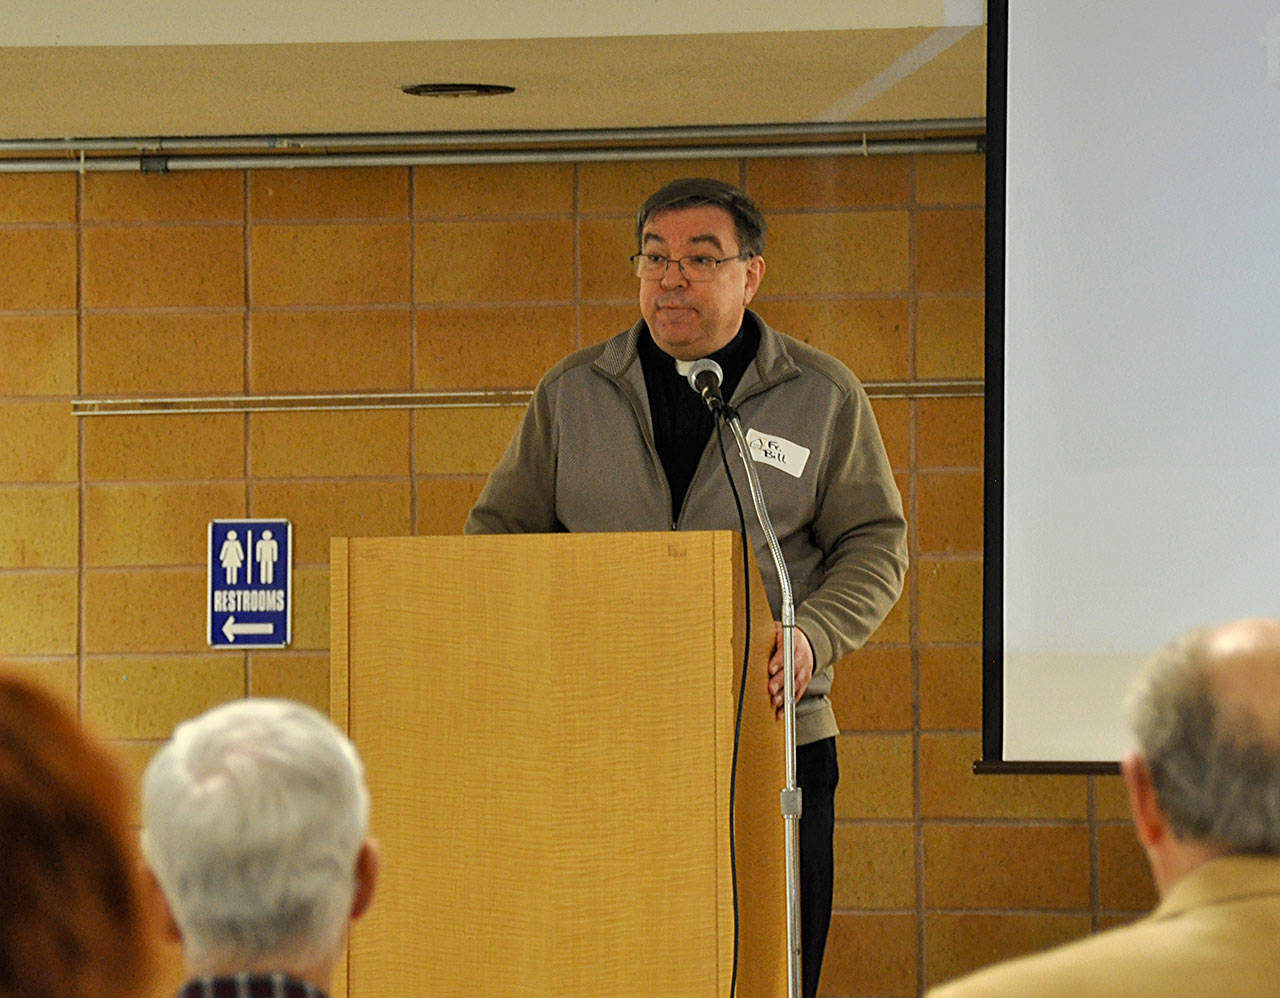 The Rev. Bill McKee, priest at St. Vincent De Paul Parish in Federal Way, speaks about the positive encounters that have occured since the Federal Way Day Center opened. The center celebrated its first anniversary at St. Vincent De Paul’s social hall. Heidi Sanders, the Mirror